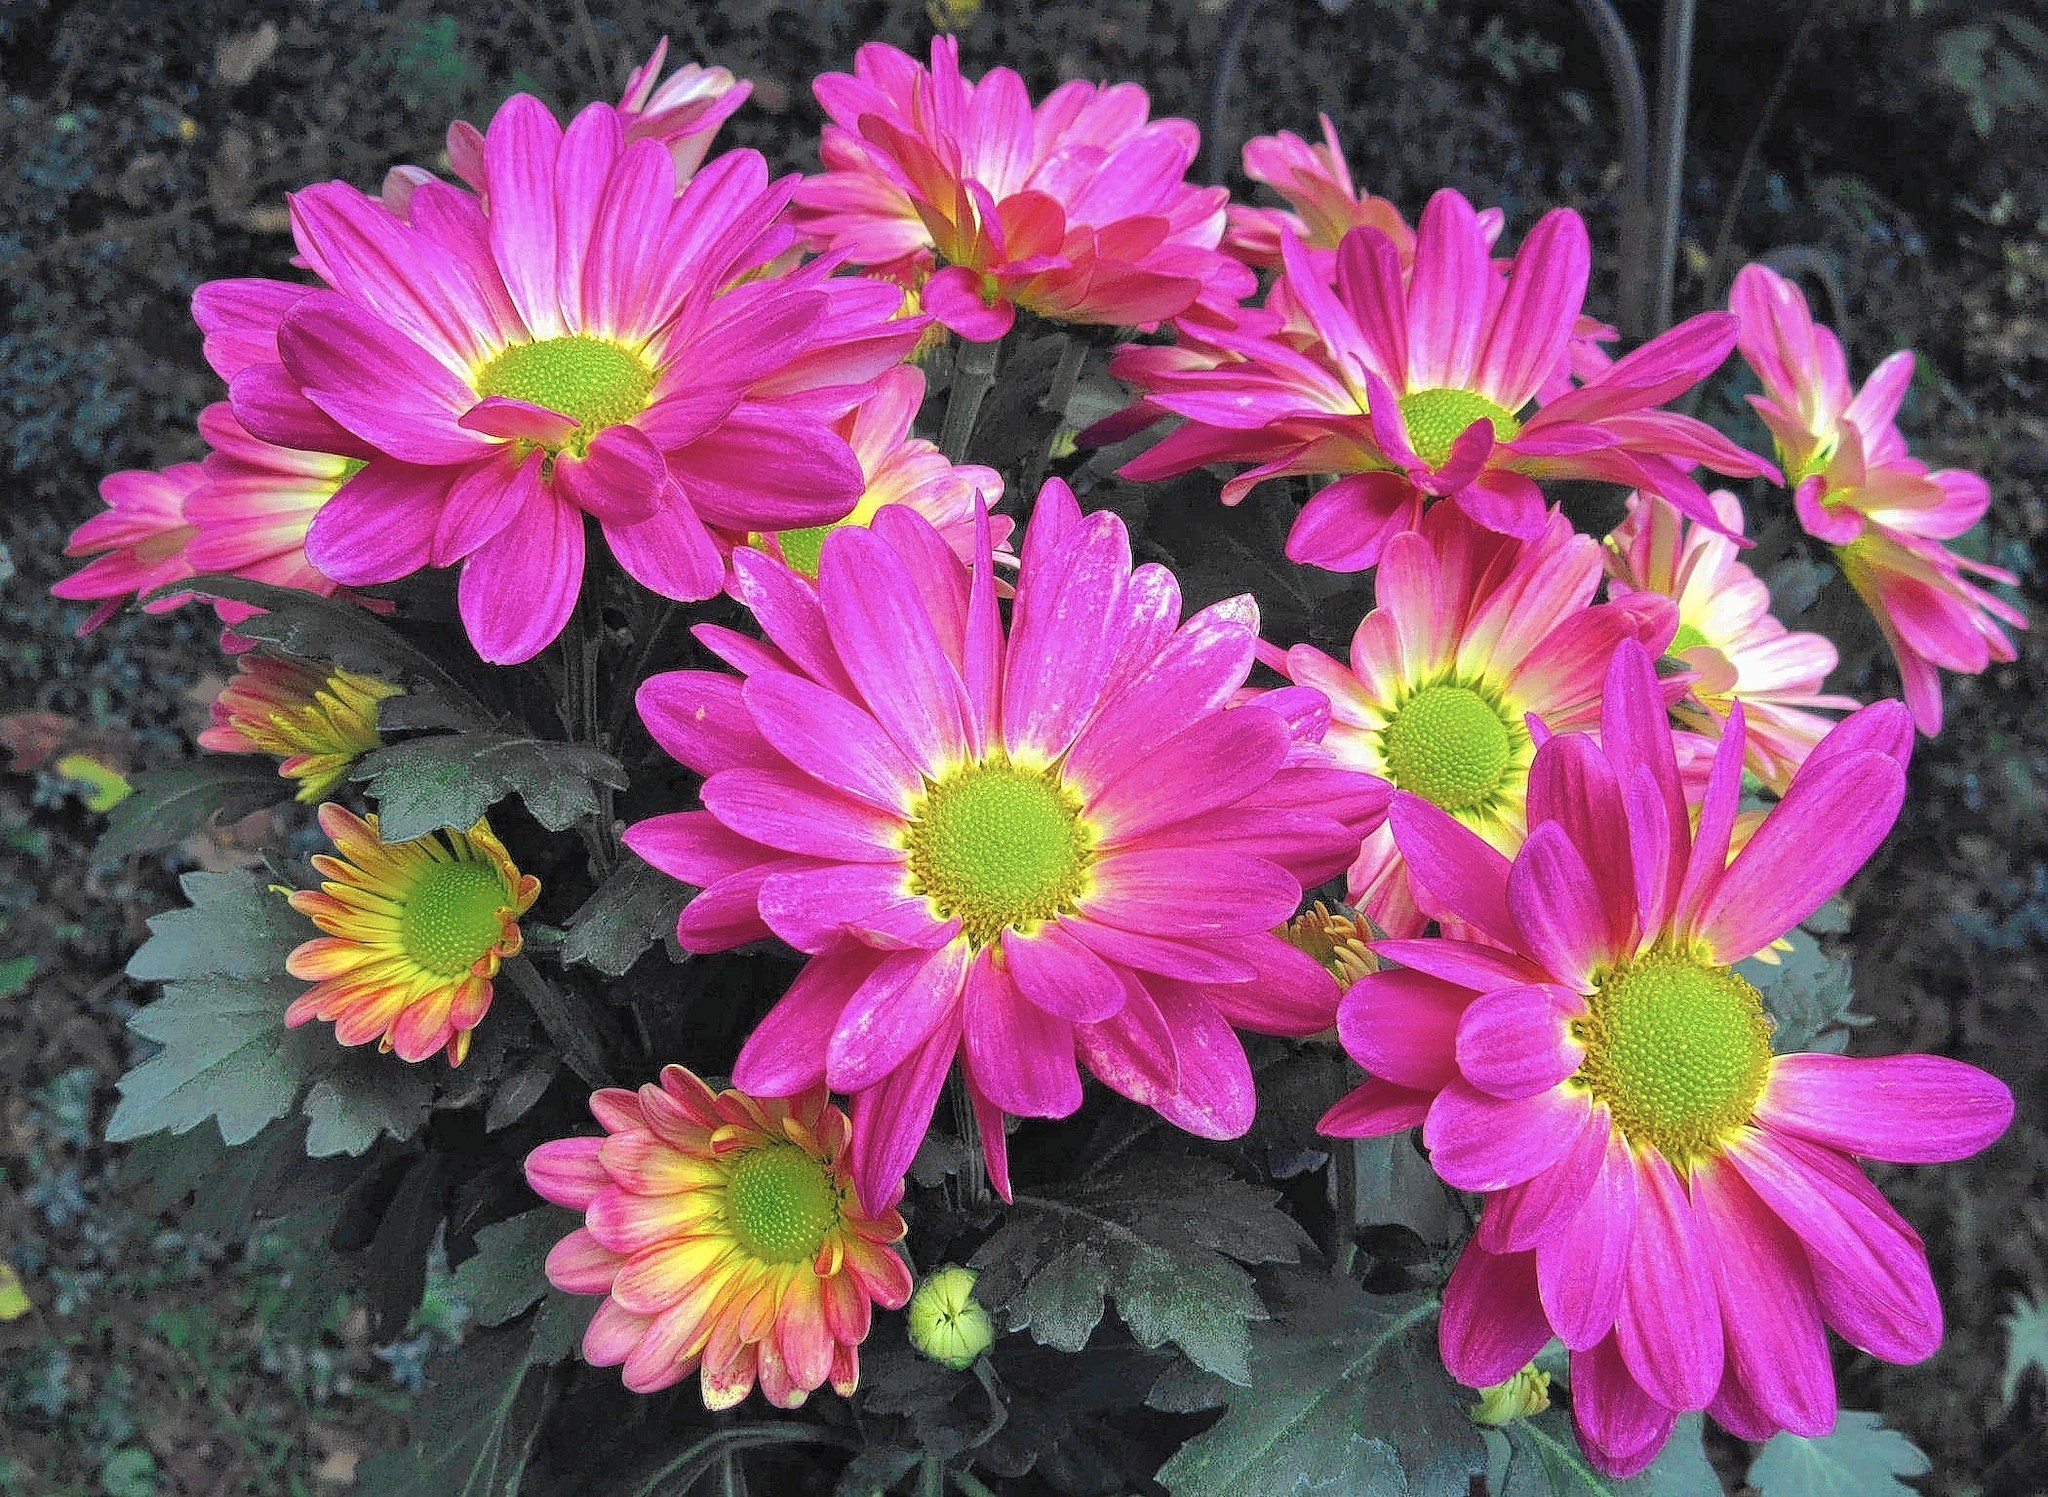 Tips for keeping hardy fall mums alive for the spring - The Morning Call